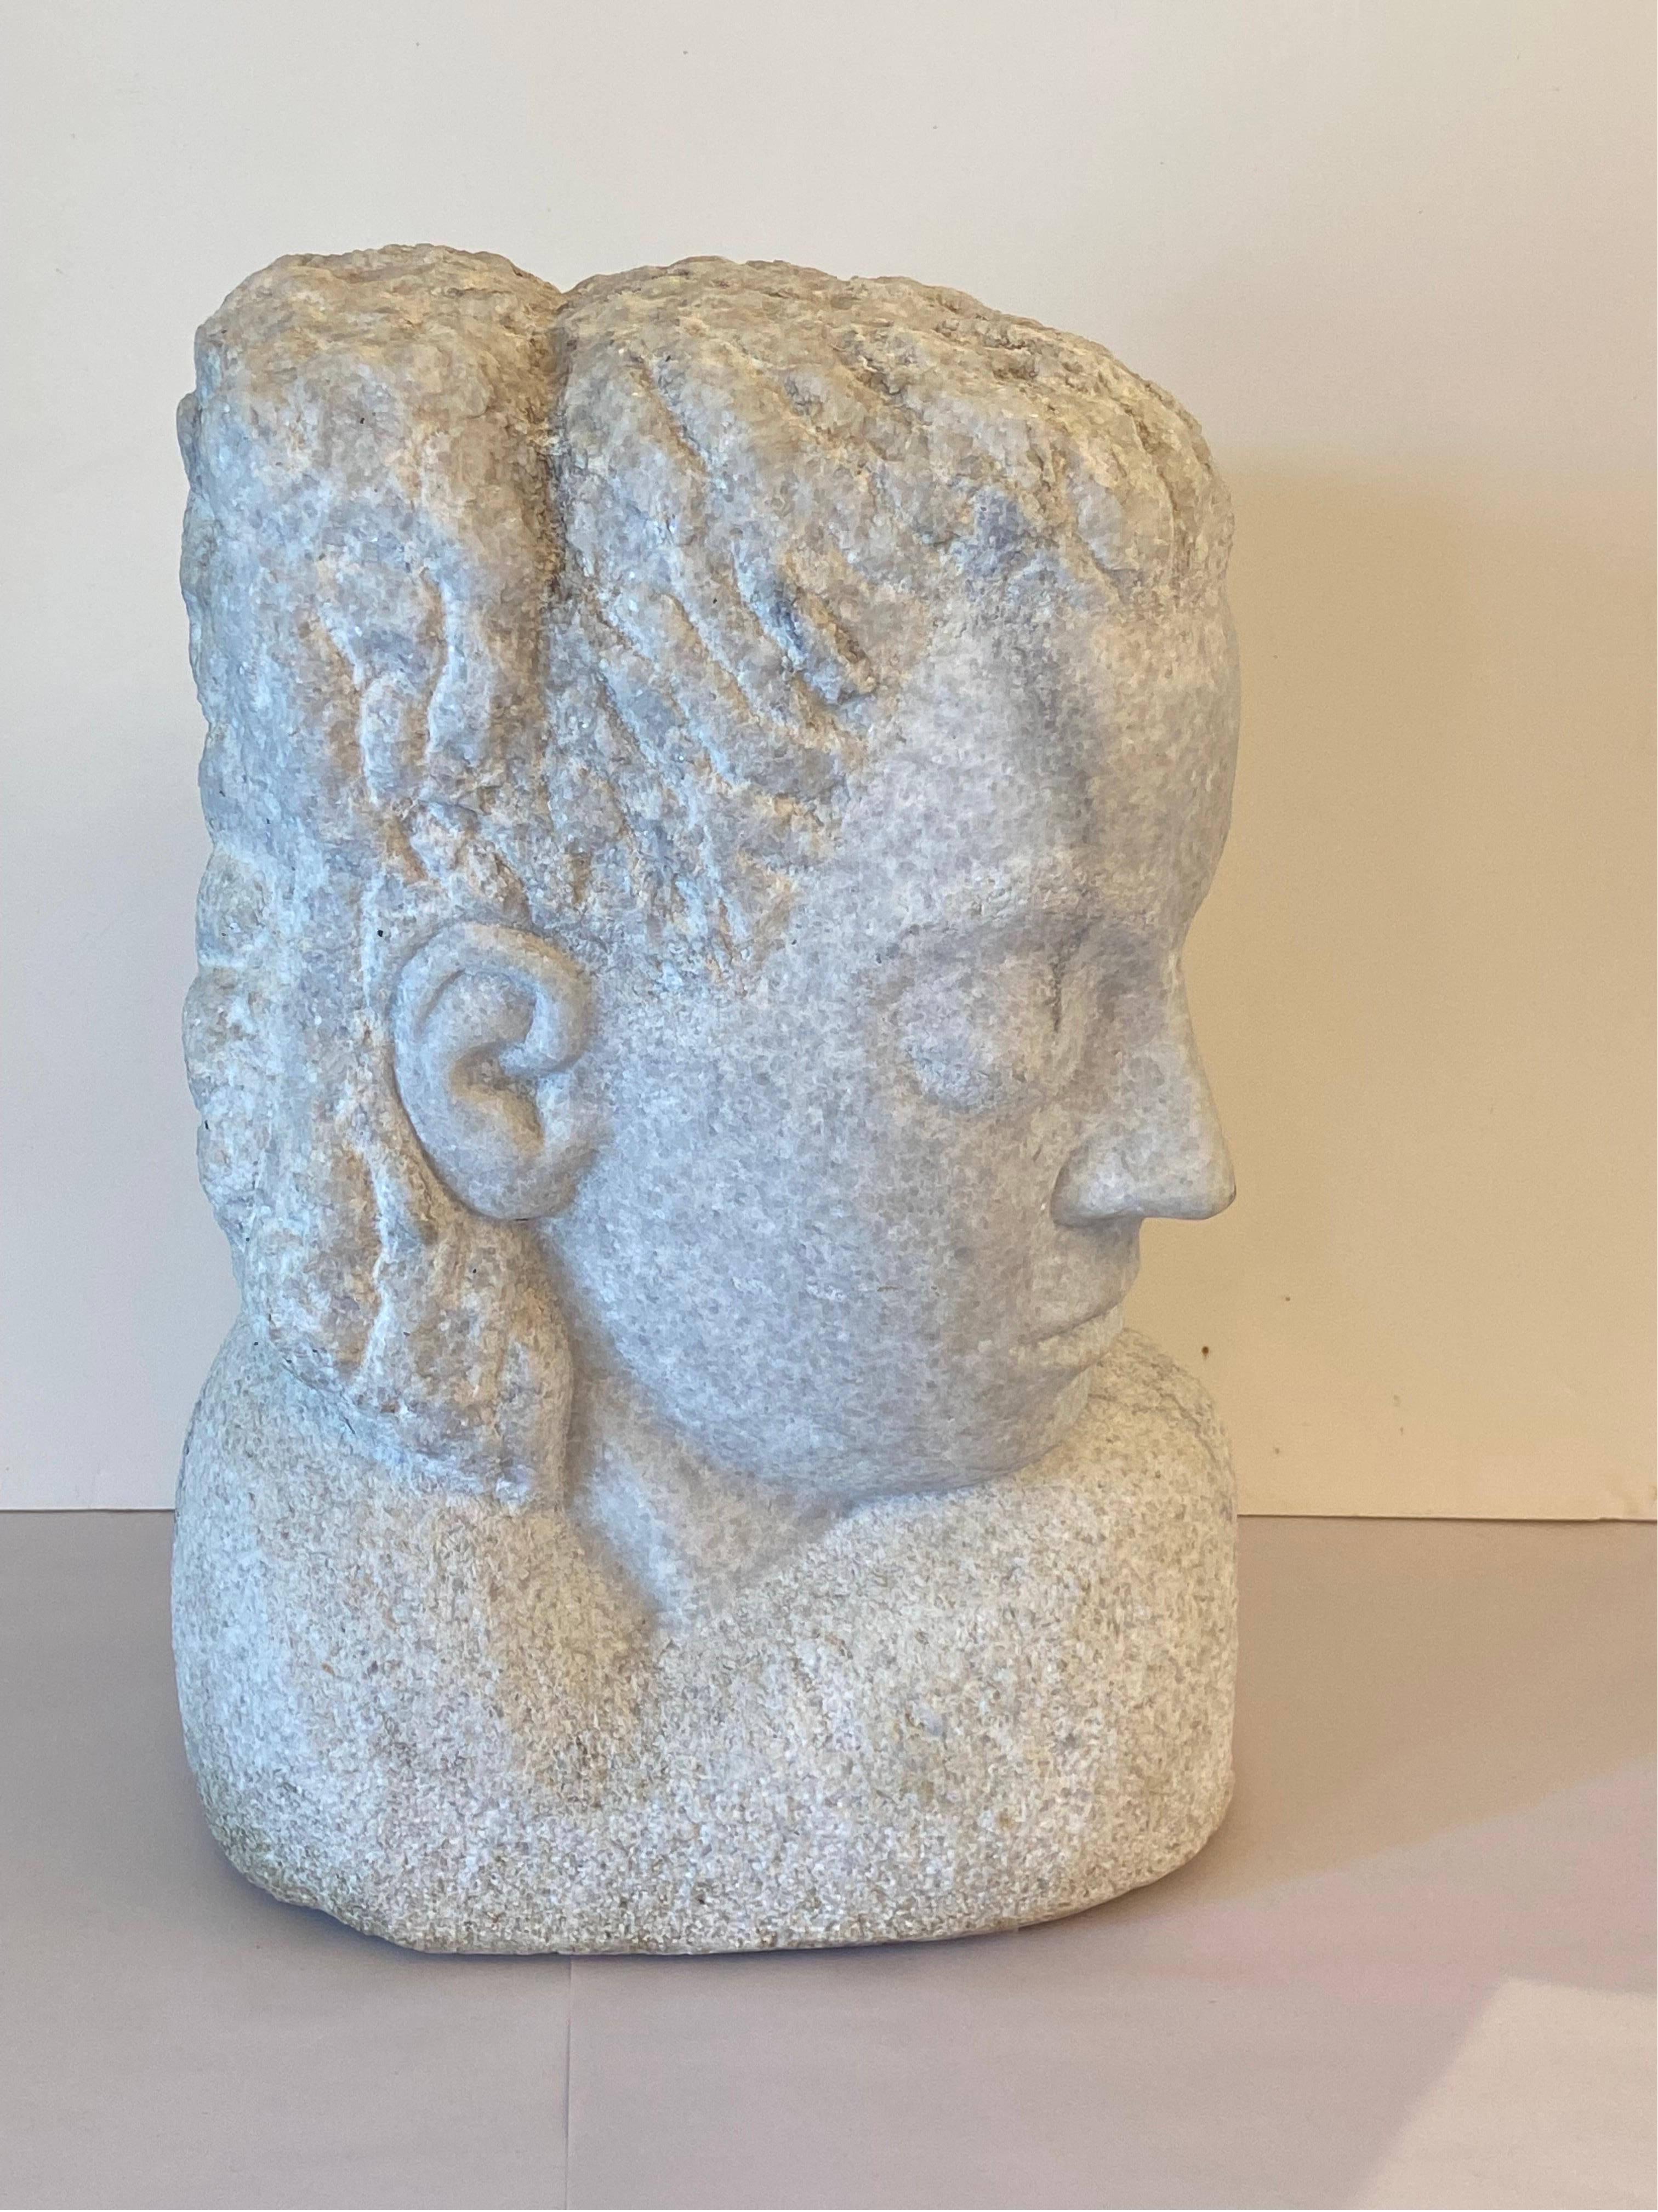 Well portioned modernist sculpture of a woman in the early art deco style.. An intense face with strong chisel marks and fine detail… Circa early 20th century.